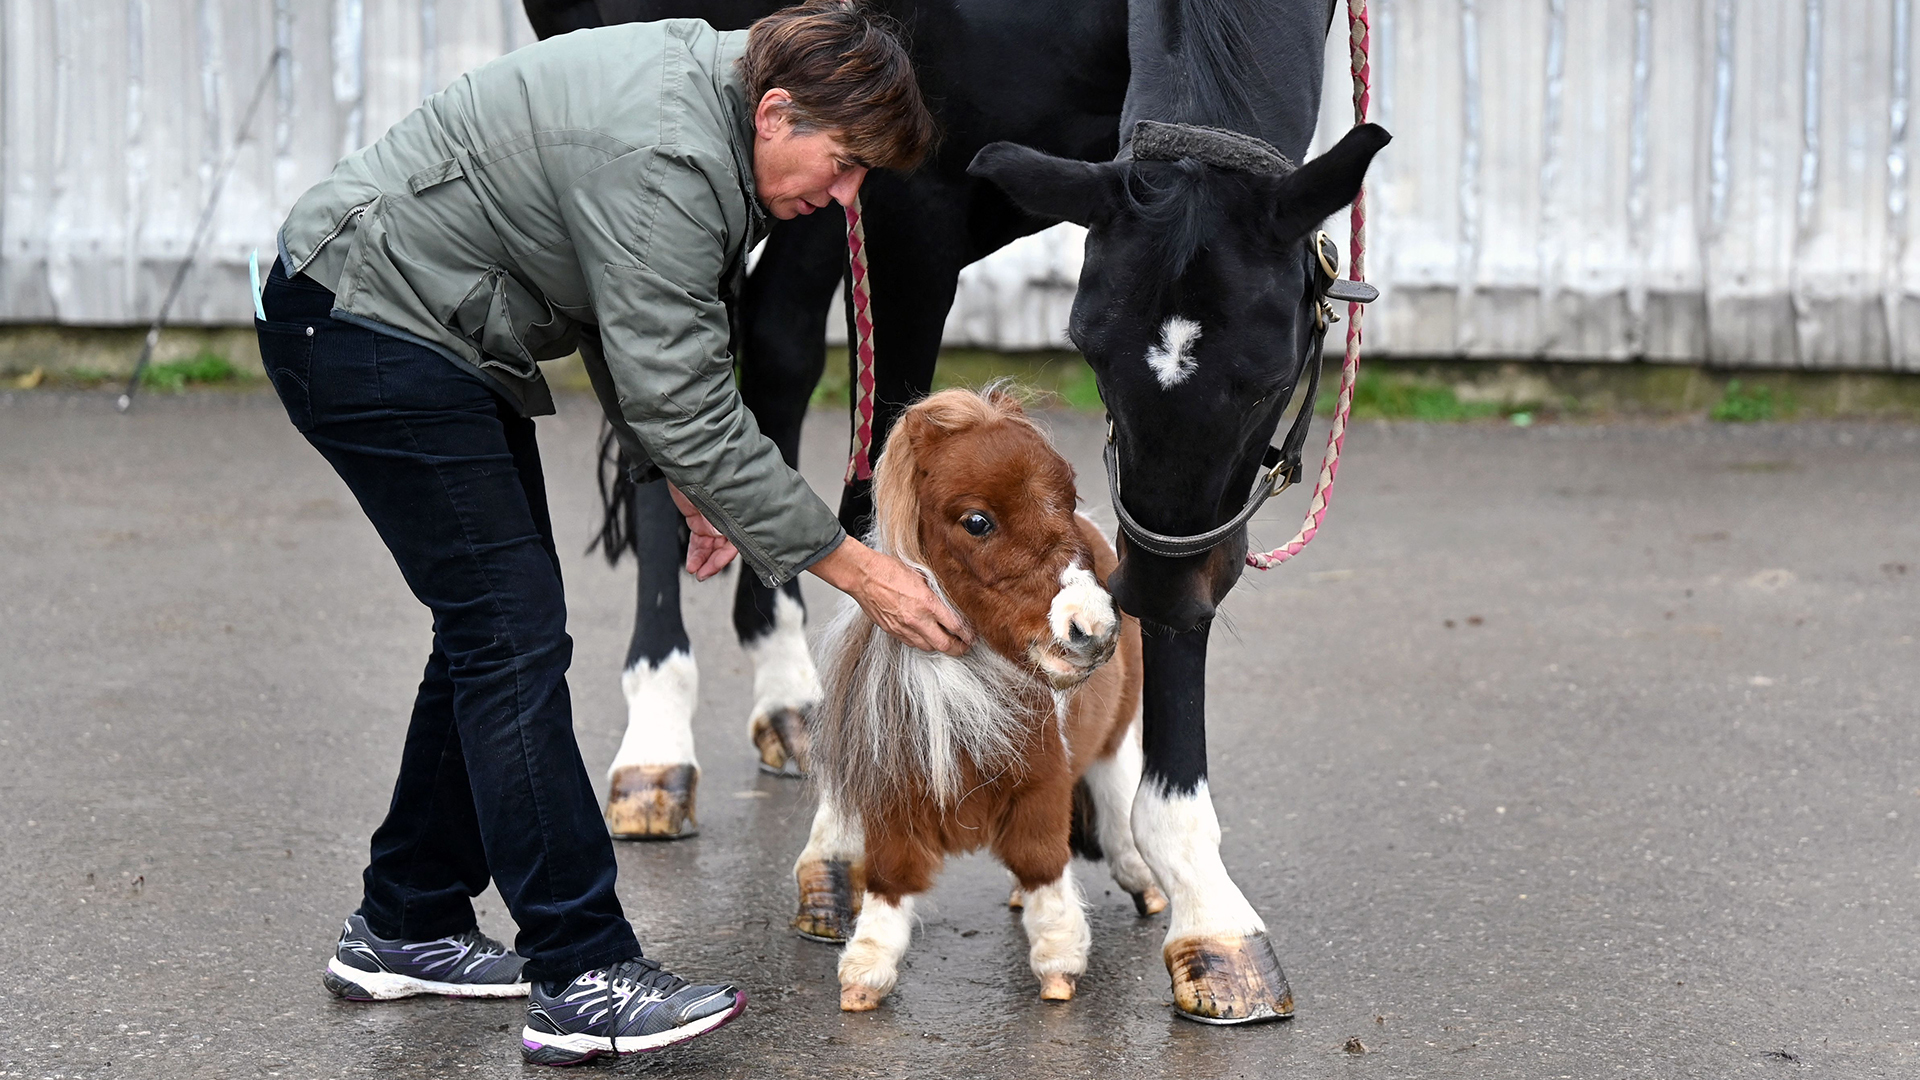 worlds smallest horse breed